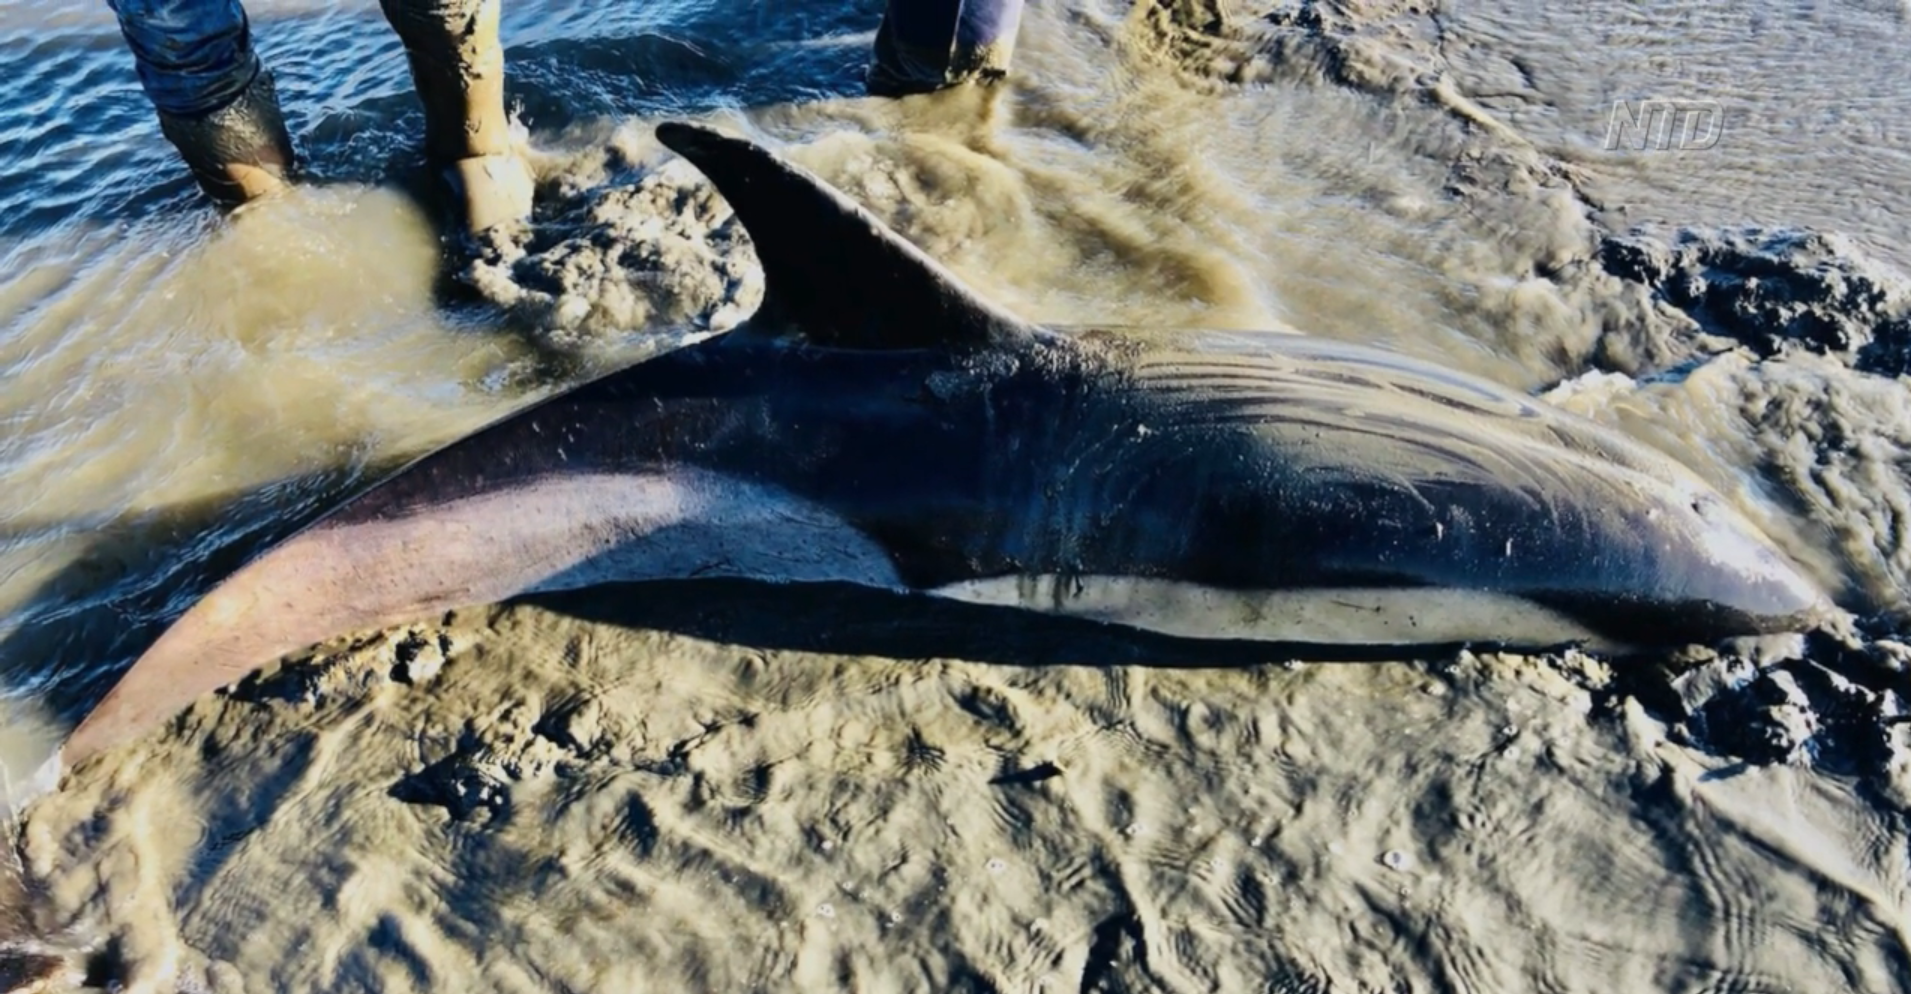 Police, Firemen Assist Beached Dolphin